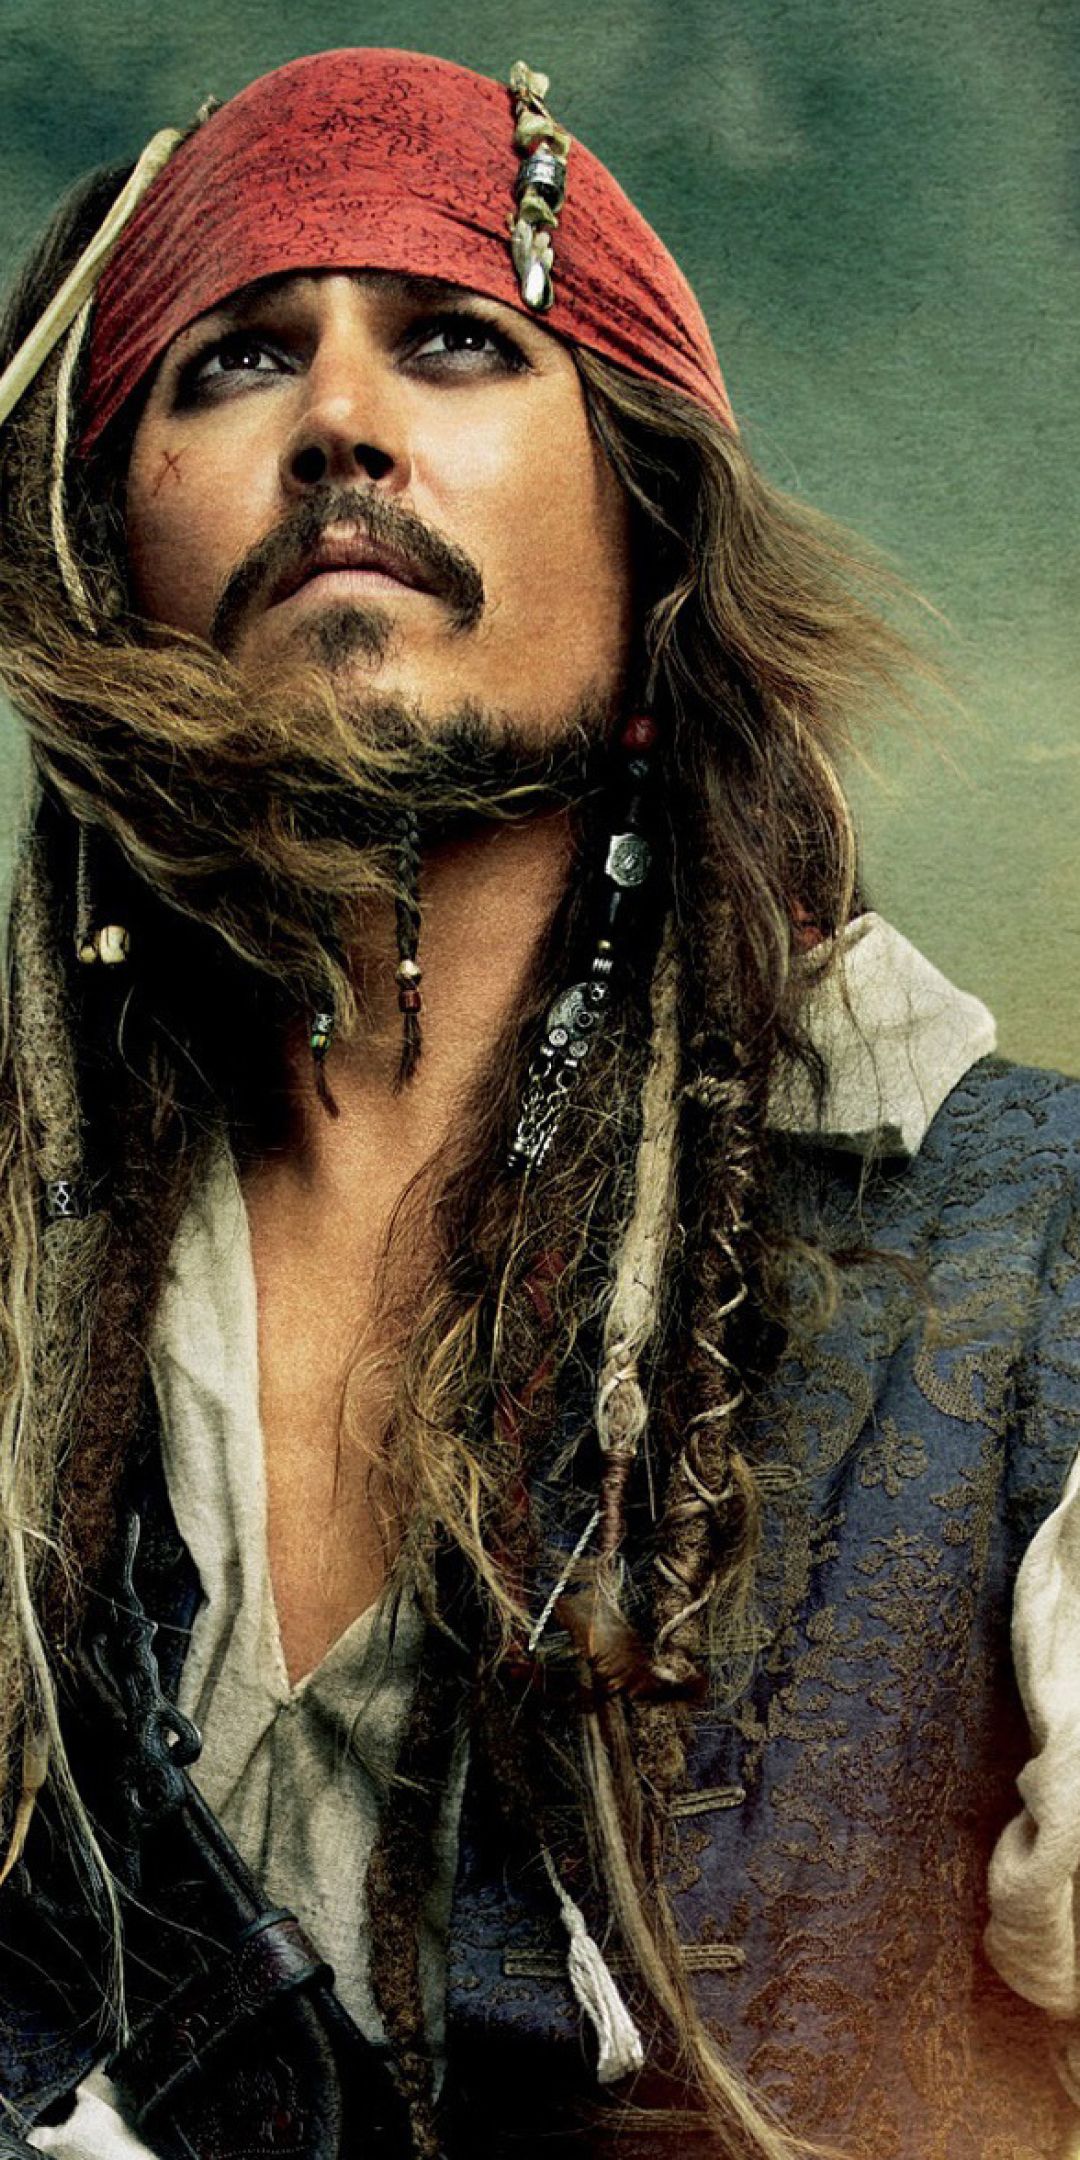 Johnny Depp in pirates of the caribbean1 One Plus 5T, Honor 7x, Honor view Lg Q6 Wallpaper, HD Movies 4K Wallpaper, Image, Photo and Background